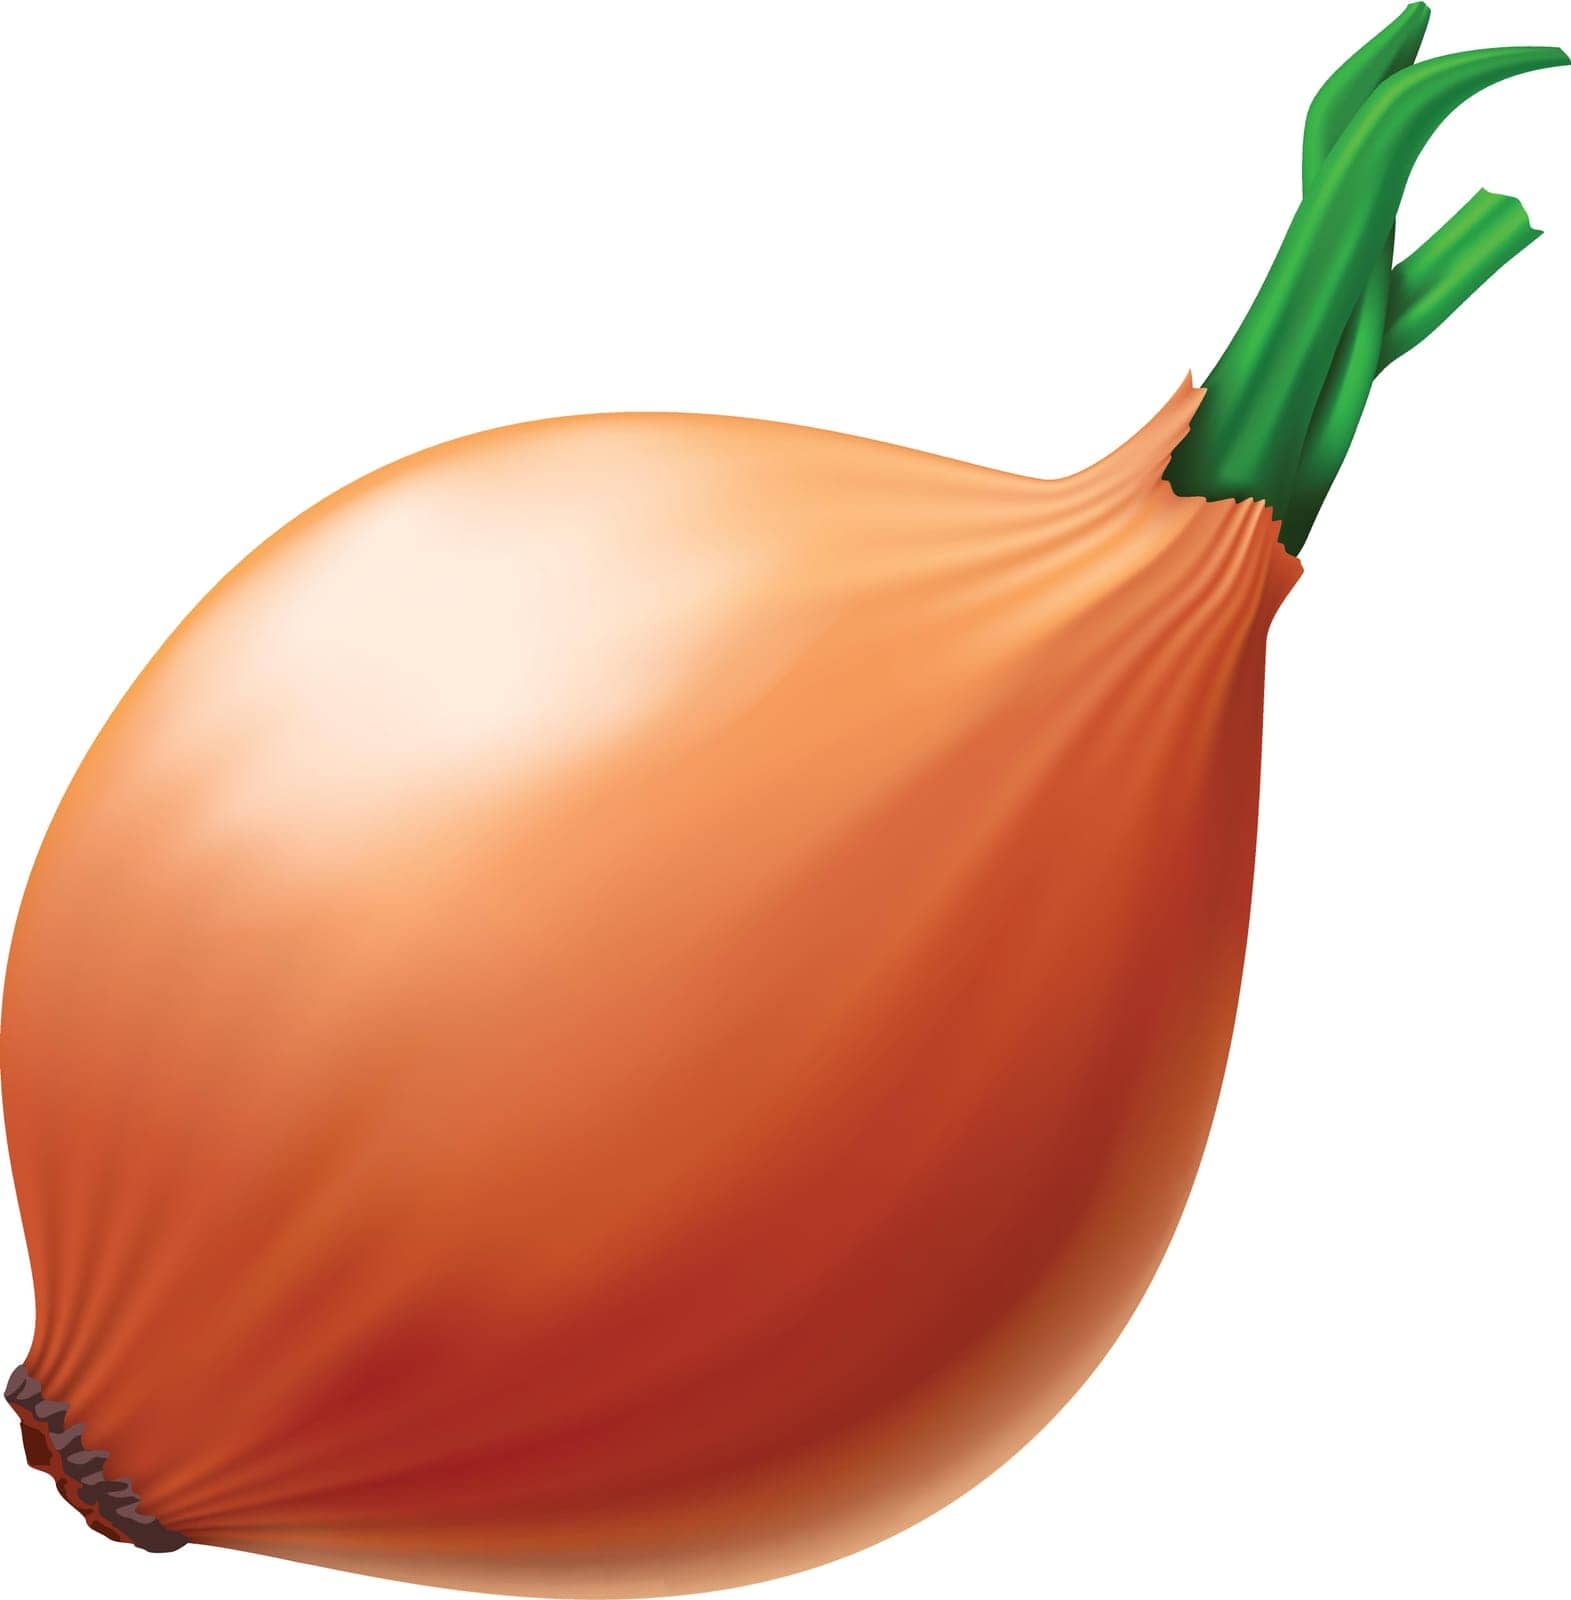 illustration of realistic onion on white color background